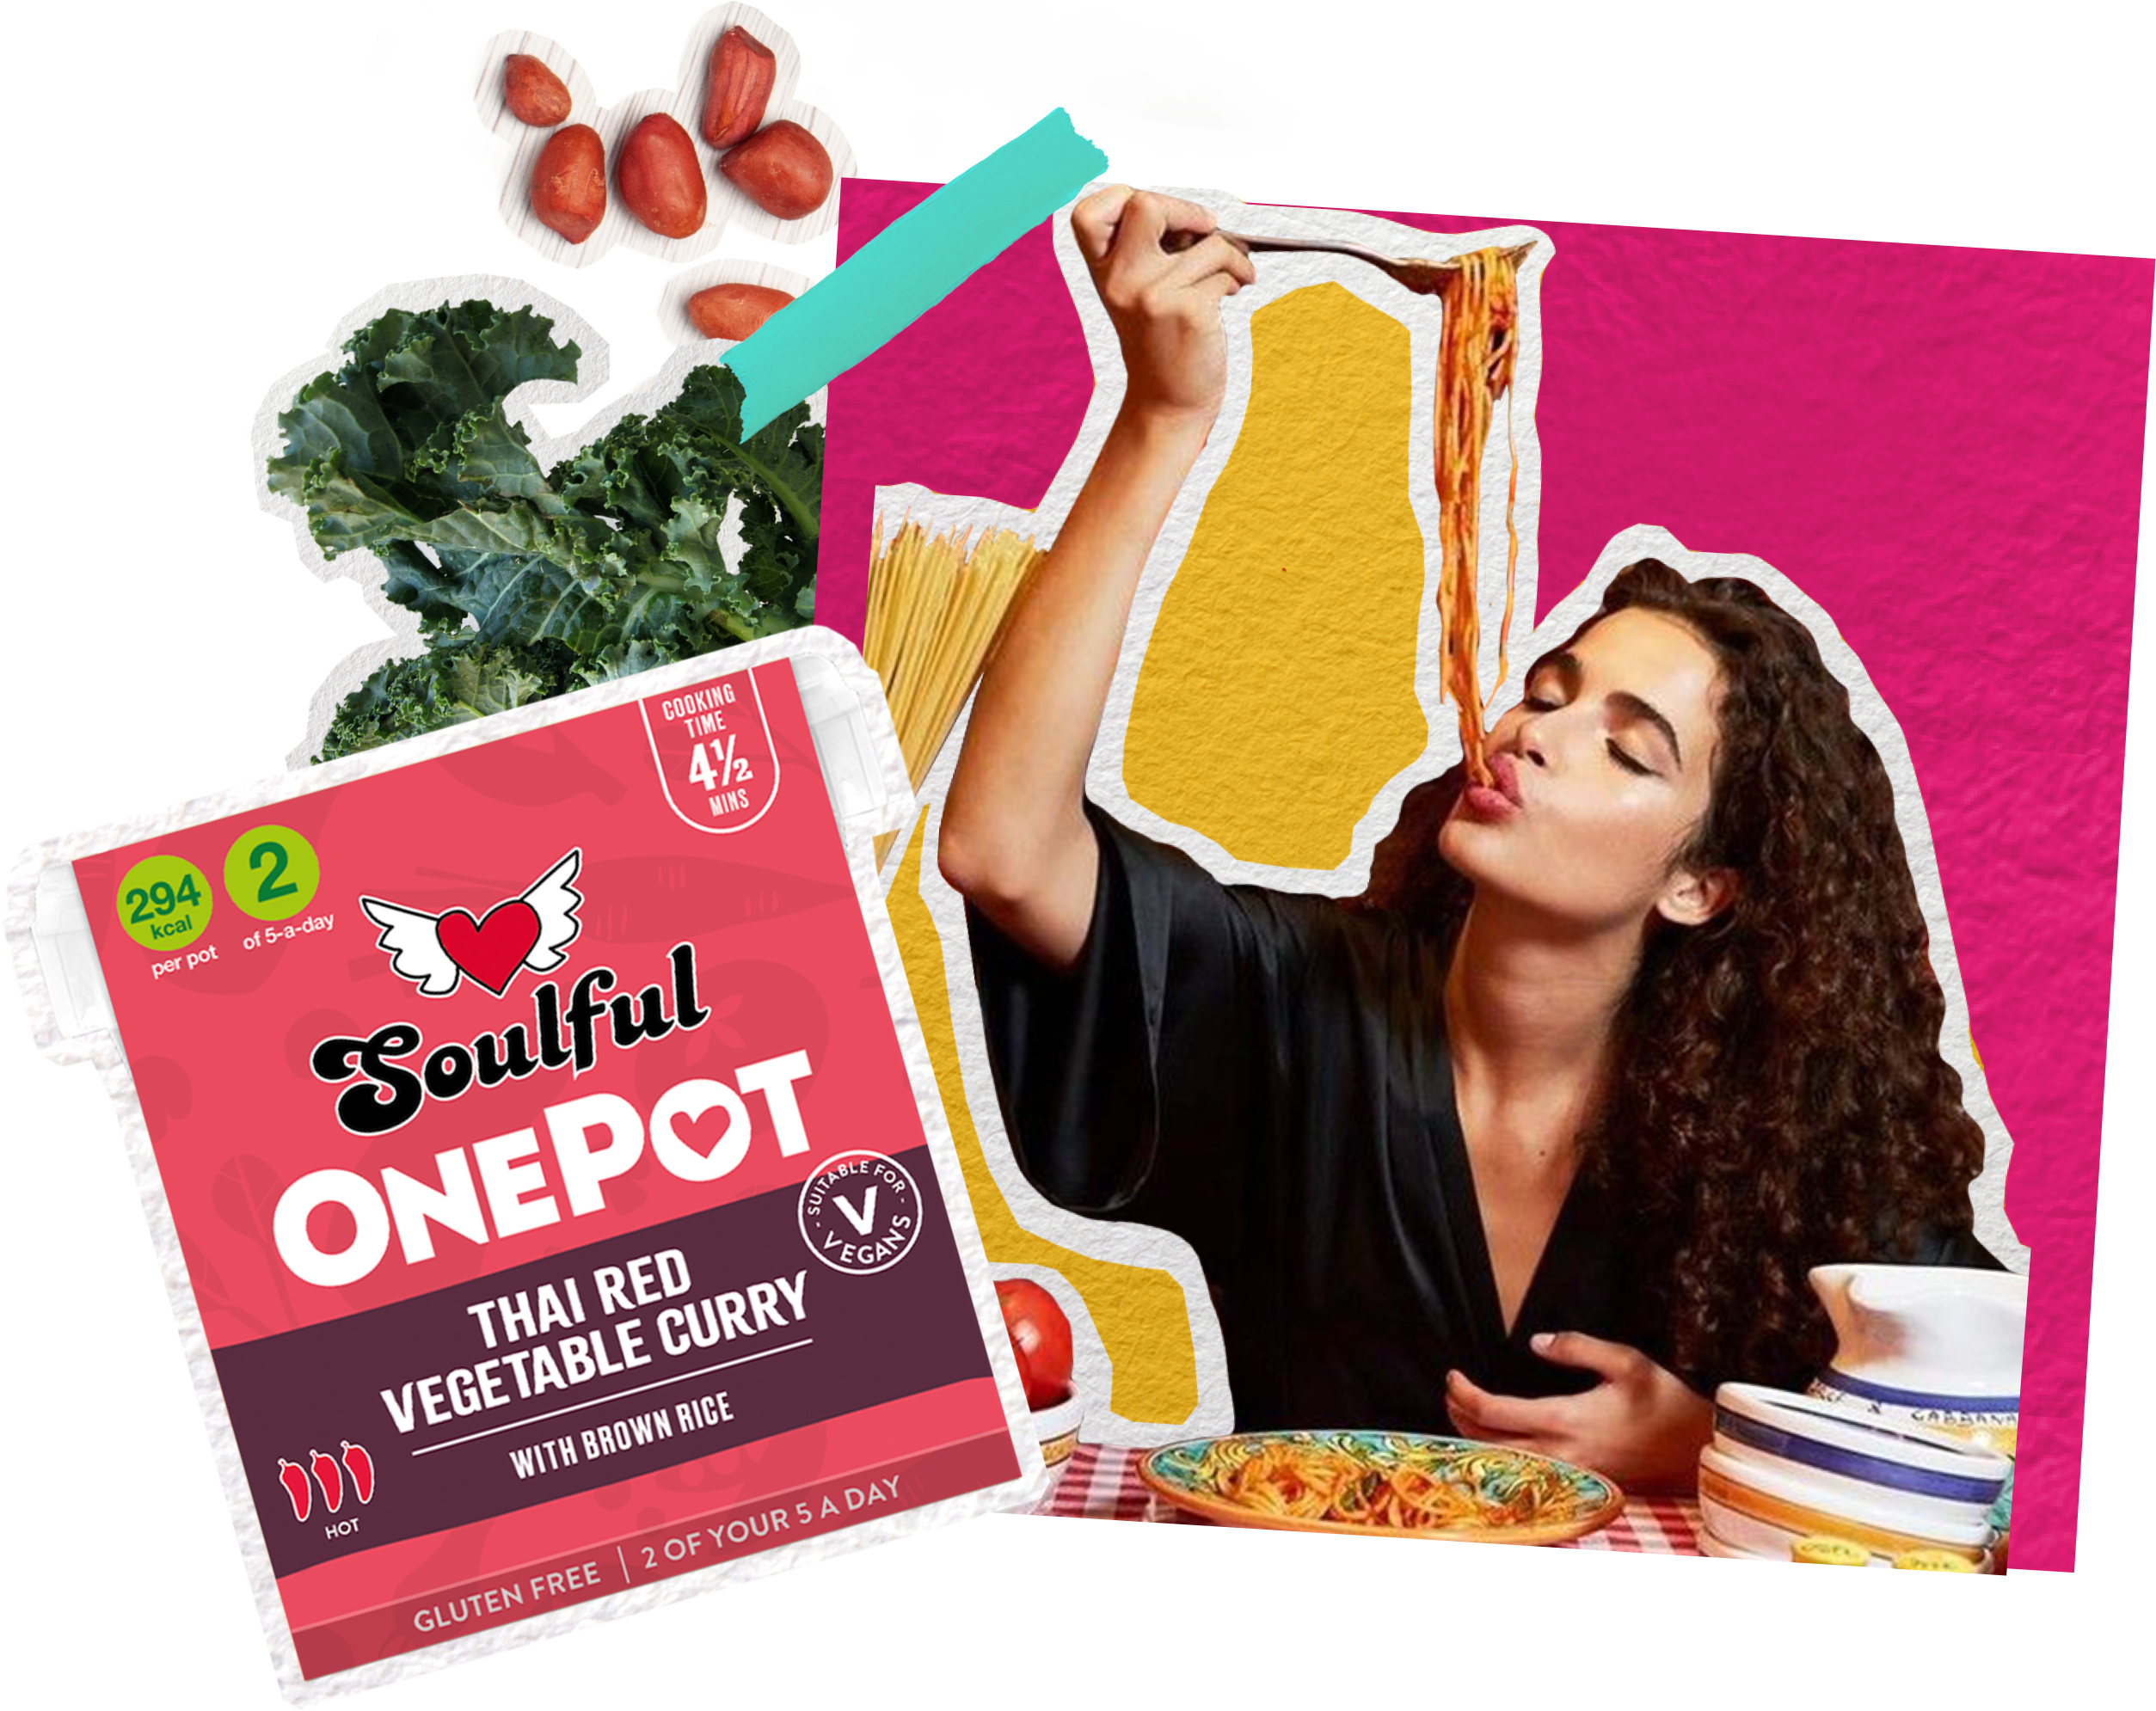 Woman eating pasta and image of Soulful Onepot